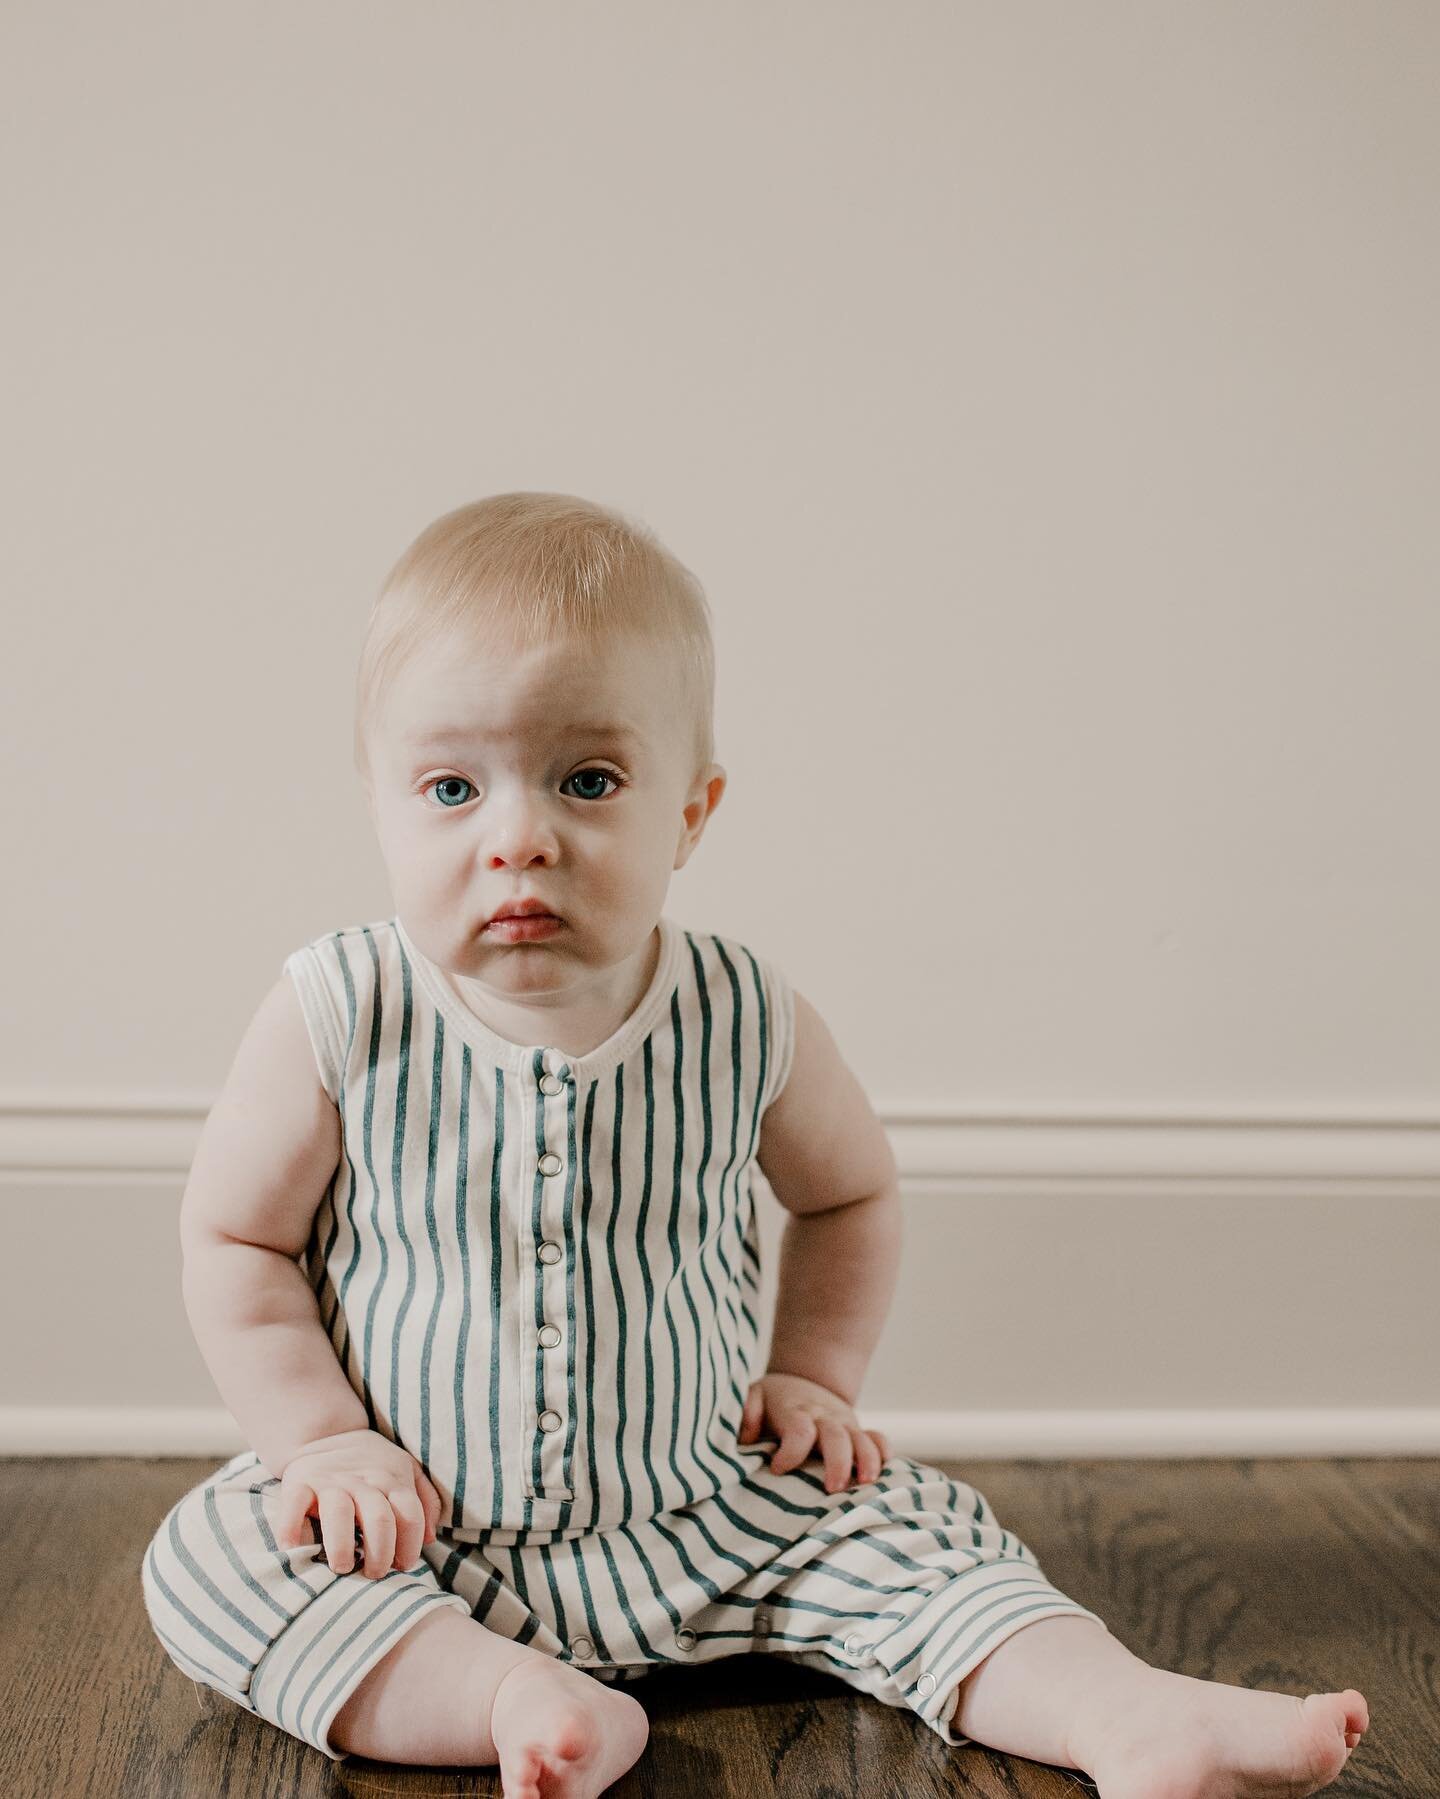 8  m o n t h s

my baby boy is an eight month old!! (back on April 3rd🤪) I was so consistent about photographing Waverly&rsquo;s month milestones, baby #2 is a little more difficult to keep up with! Certainly doesn&rsquo;t mean we love this boy any 